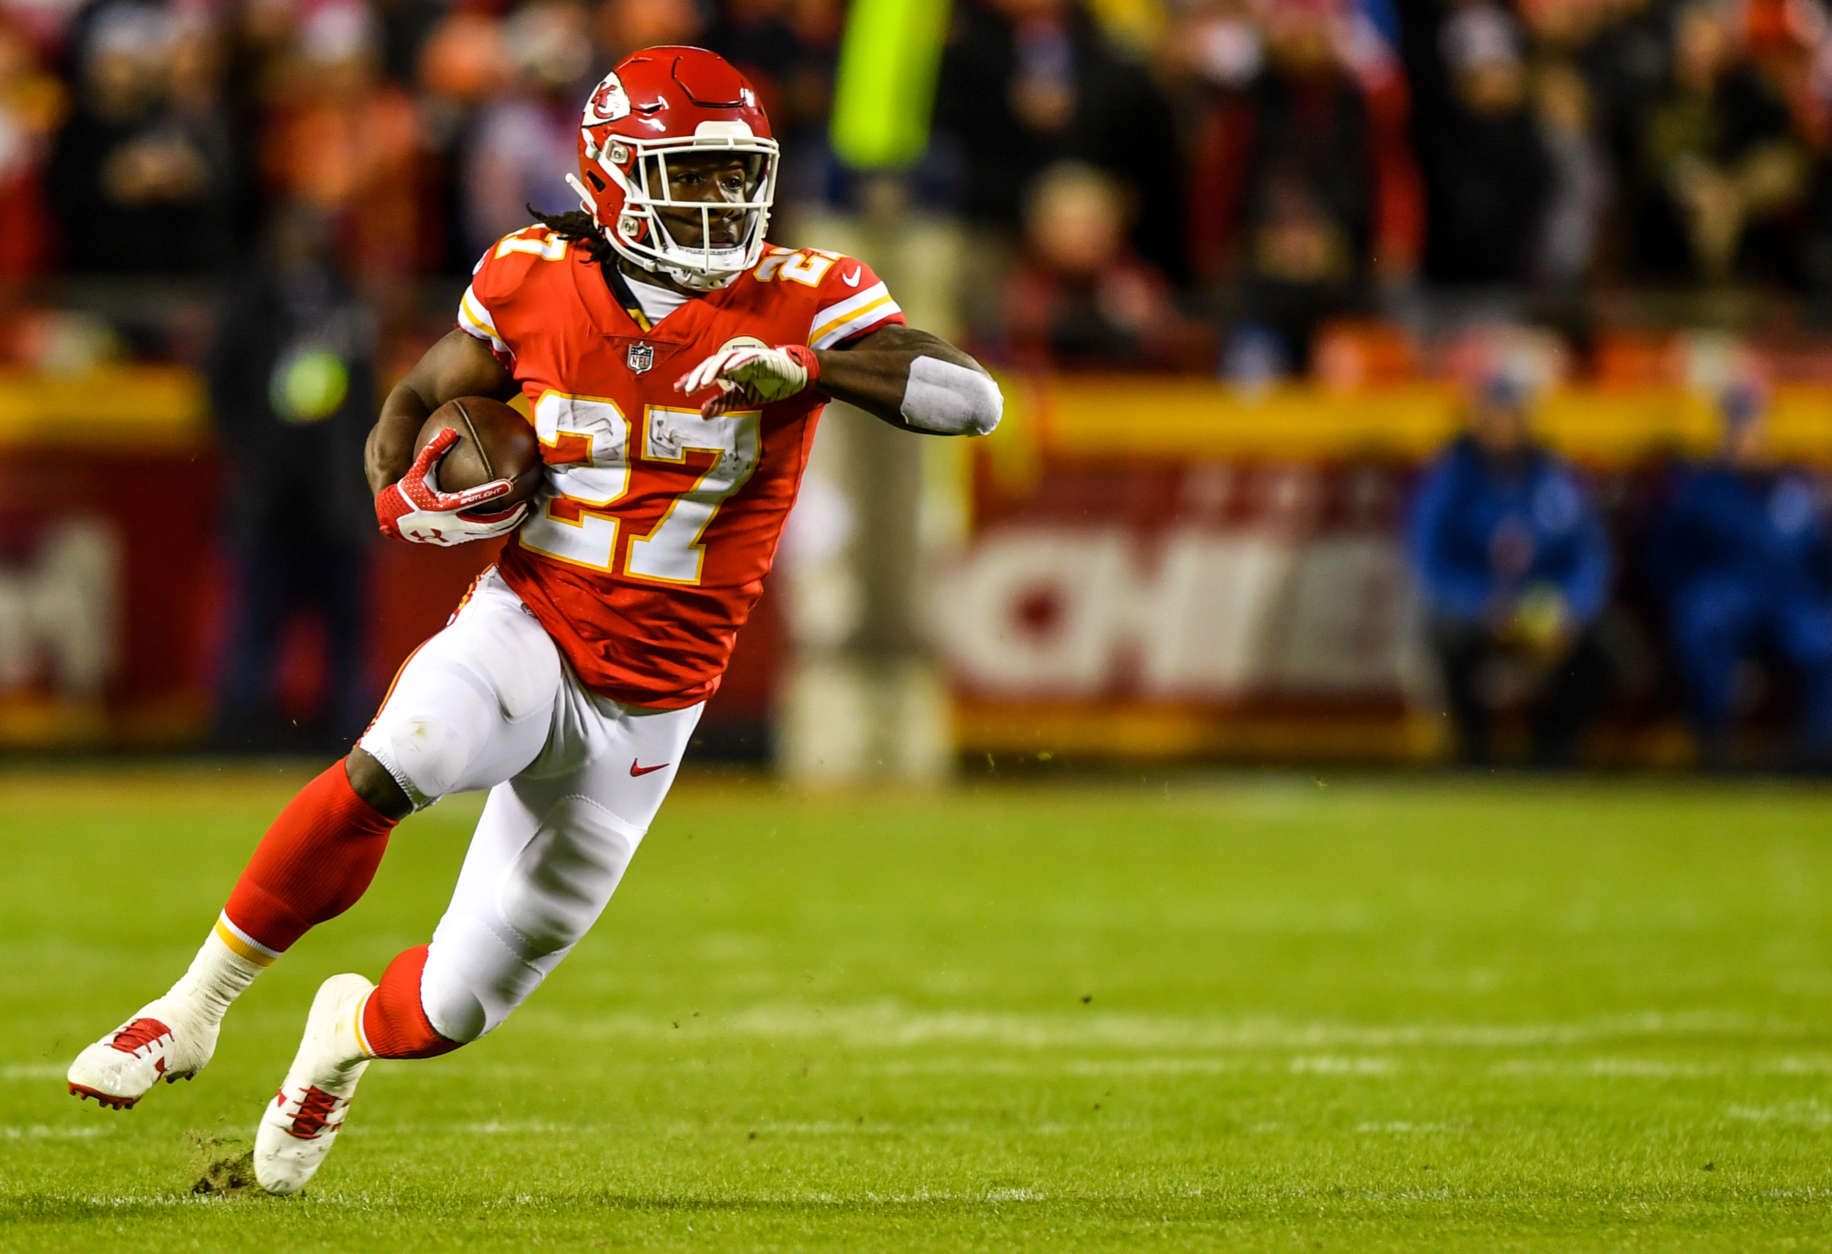 KANSAS CITY, MO - OCTOBER 30: Running back Kareem Hunt #27 of the Kansas City Chiefs runs through a huge hole against the Denver Broncos during the first half of the game at Arrowhead Stadium on October 30, 2017 in Kansas City, Missouri. ( Photo by Peter Aiken/Getty Images )